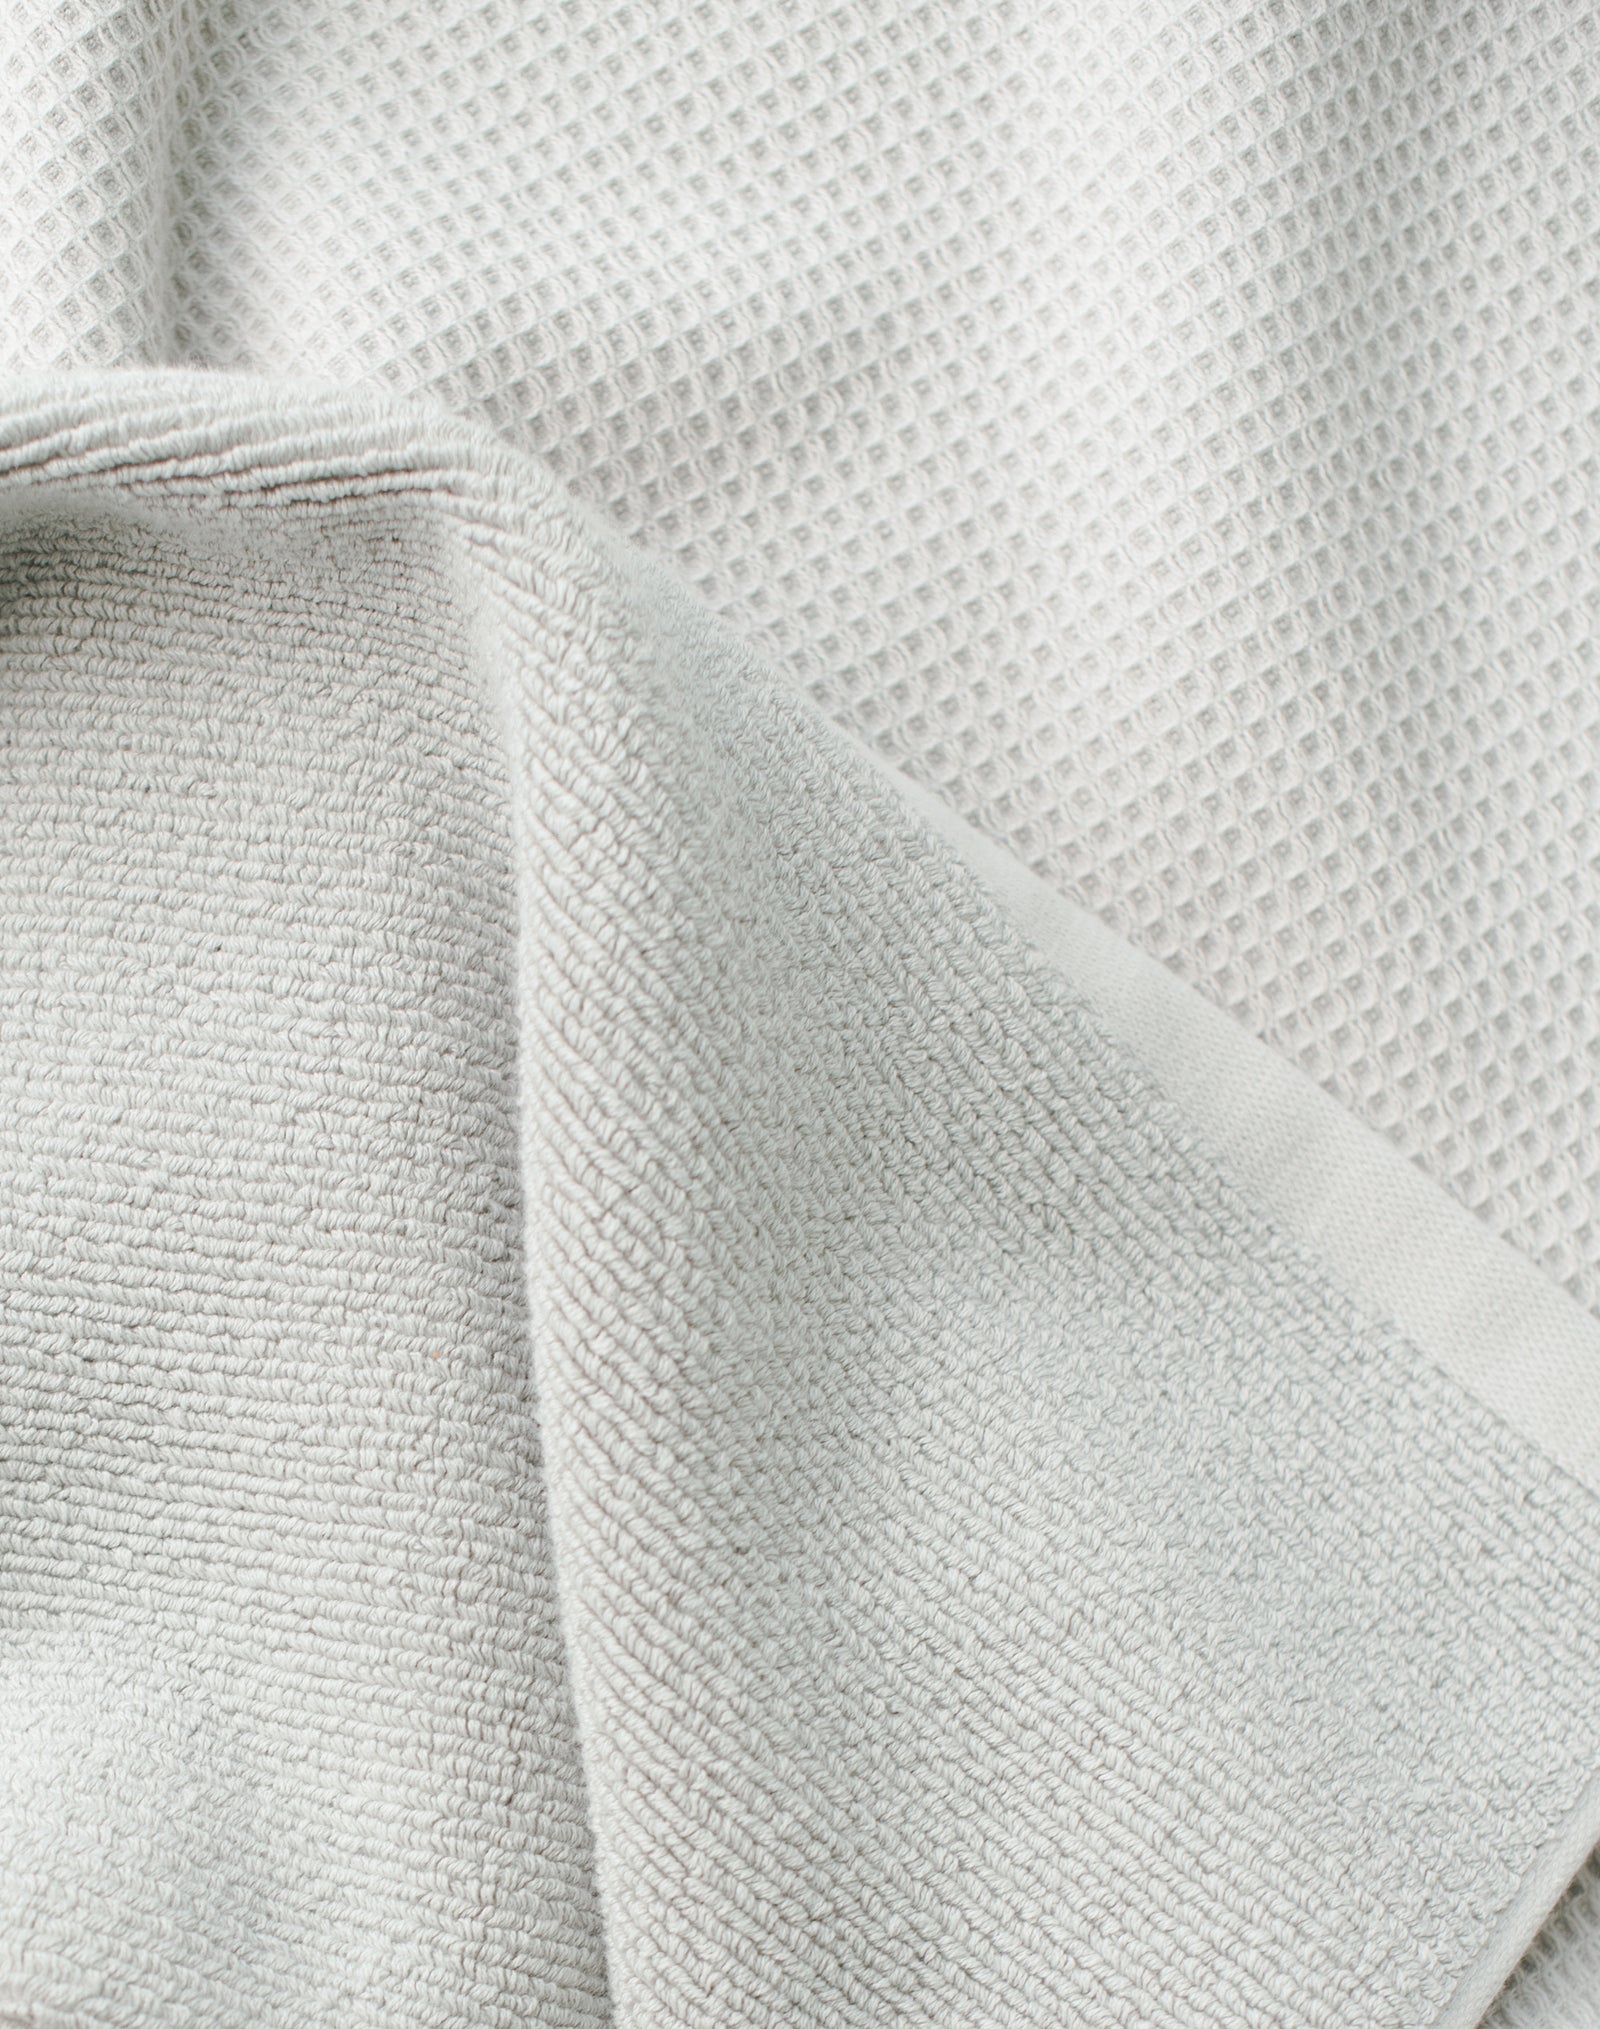 Waffle Bath Towel in the color Light Grey. Photo of Light Grey Waffle Bath Towel taken close up only showing the towel 